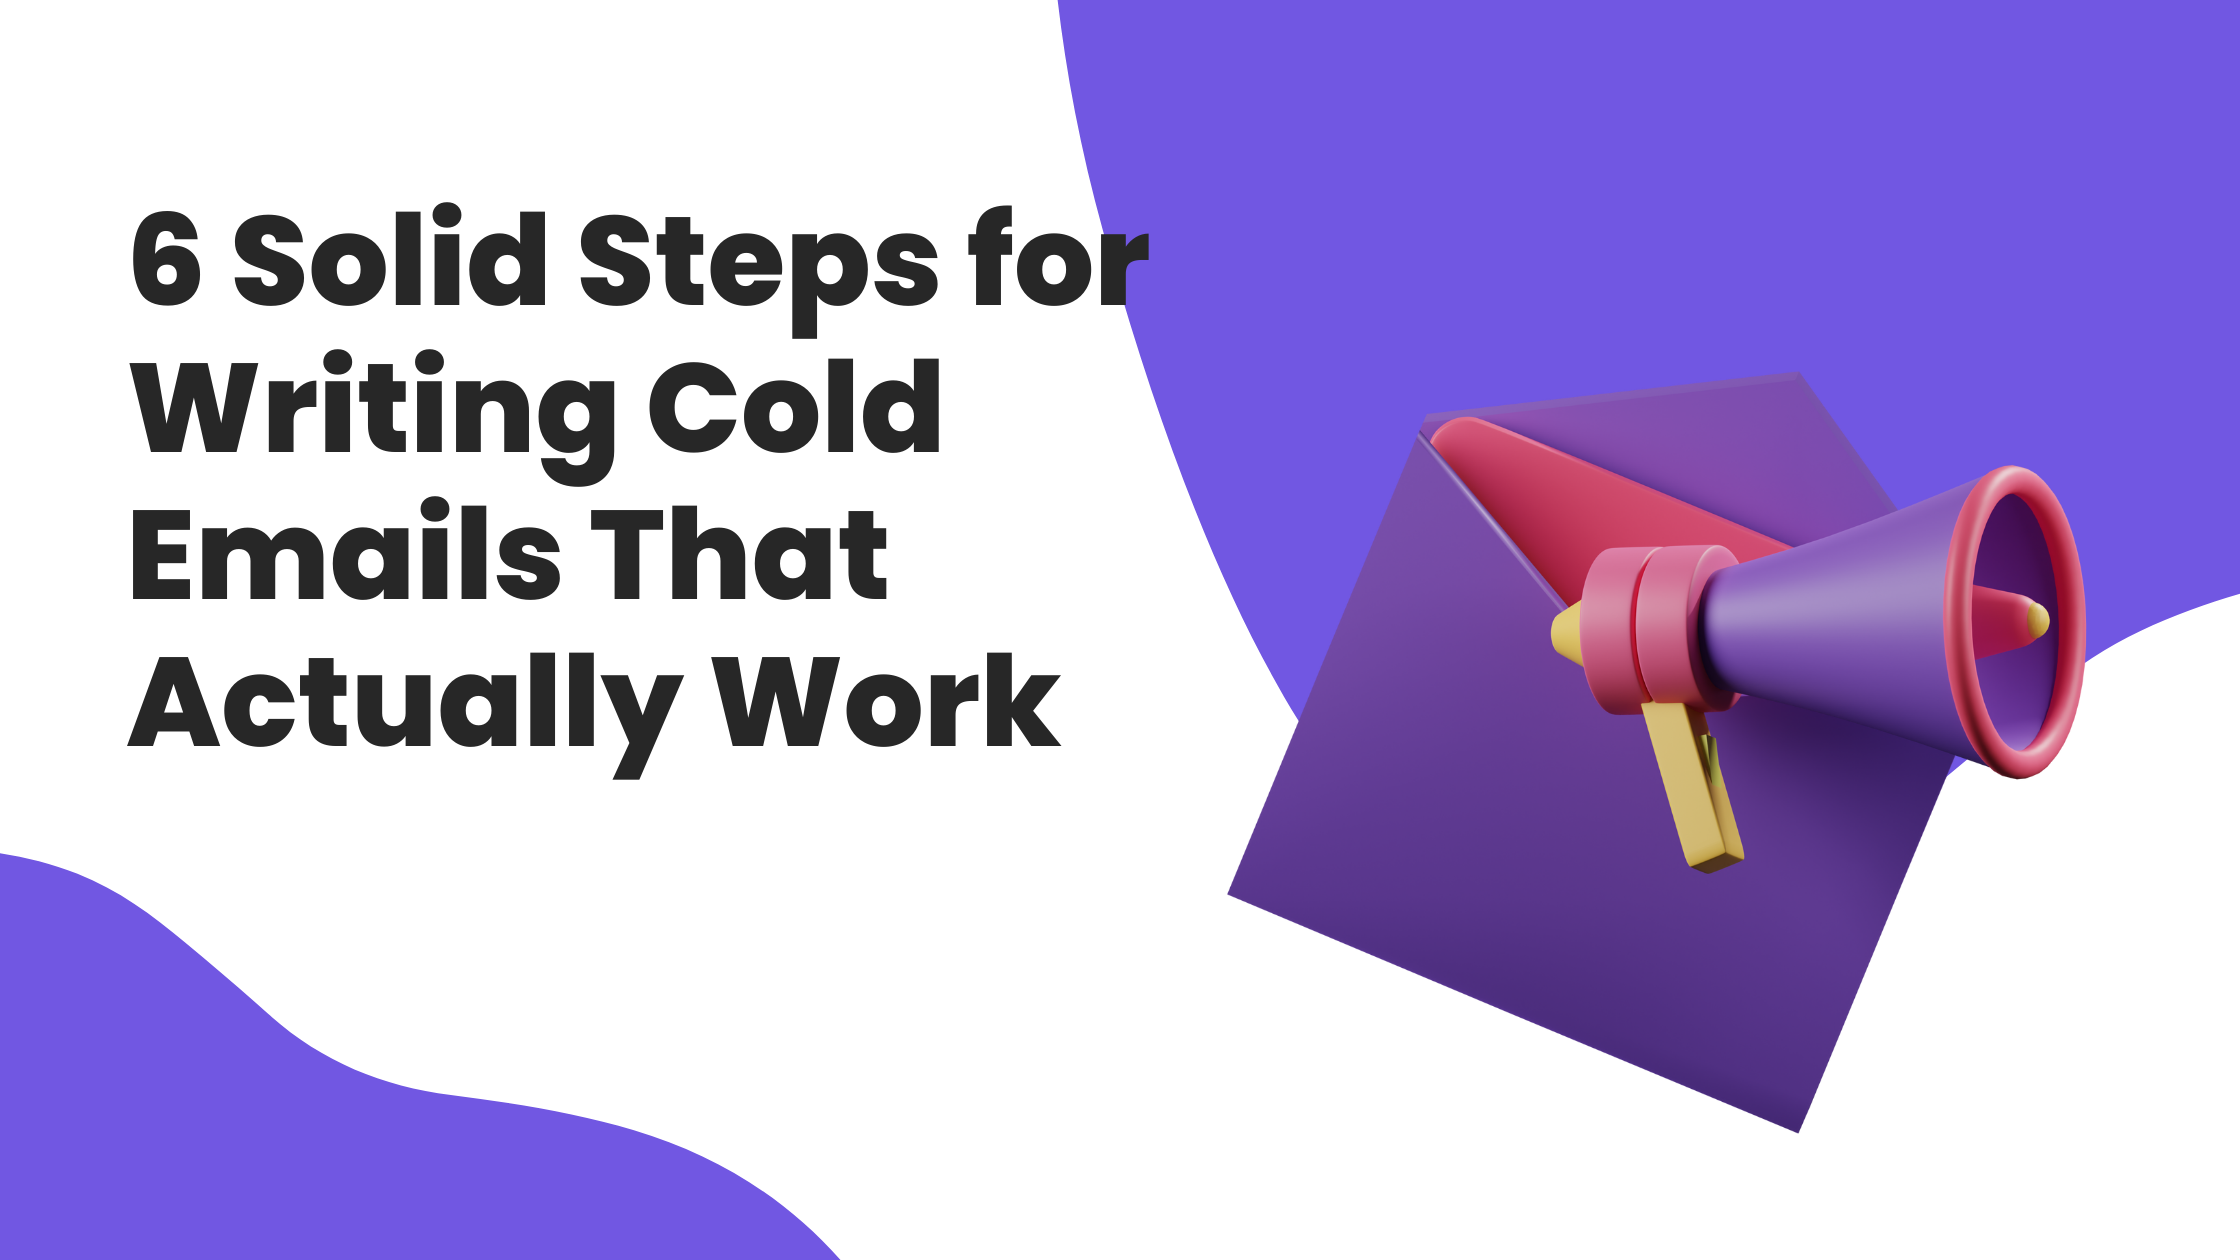 6 Solid Steps for Writing Cold Emails That Actually Work